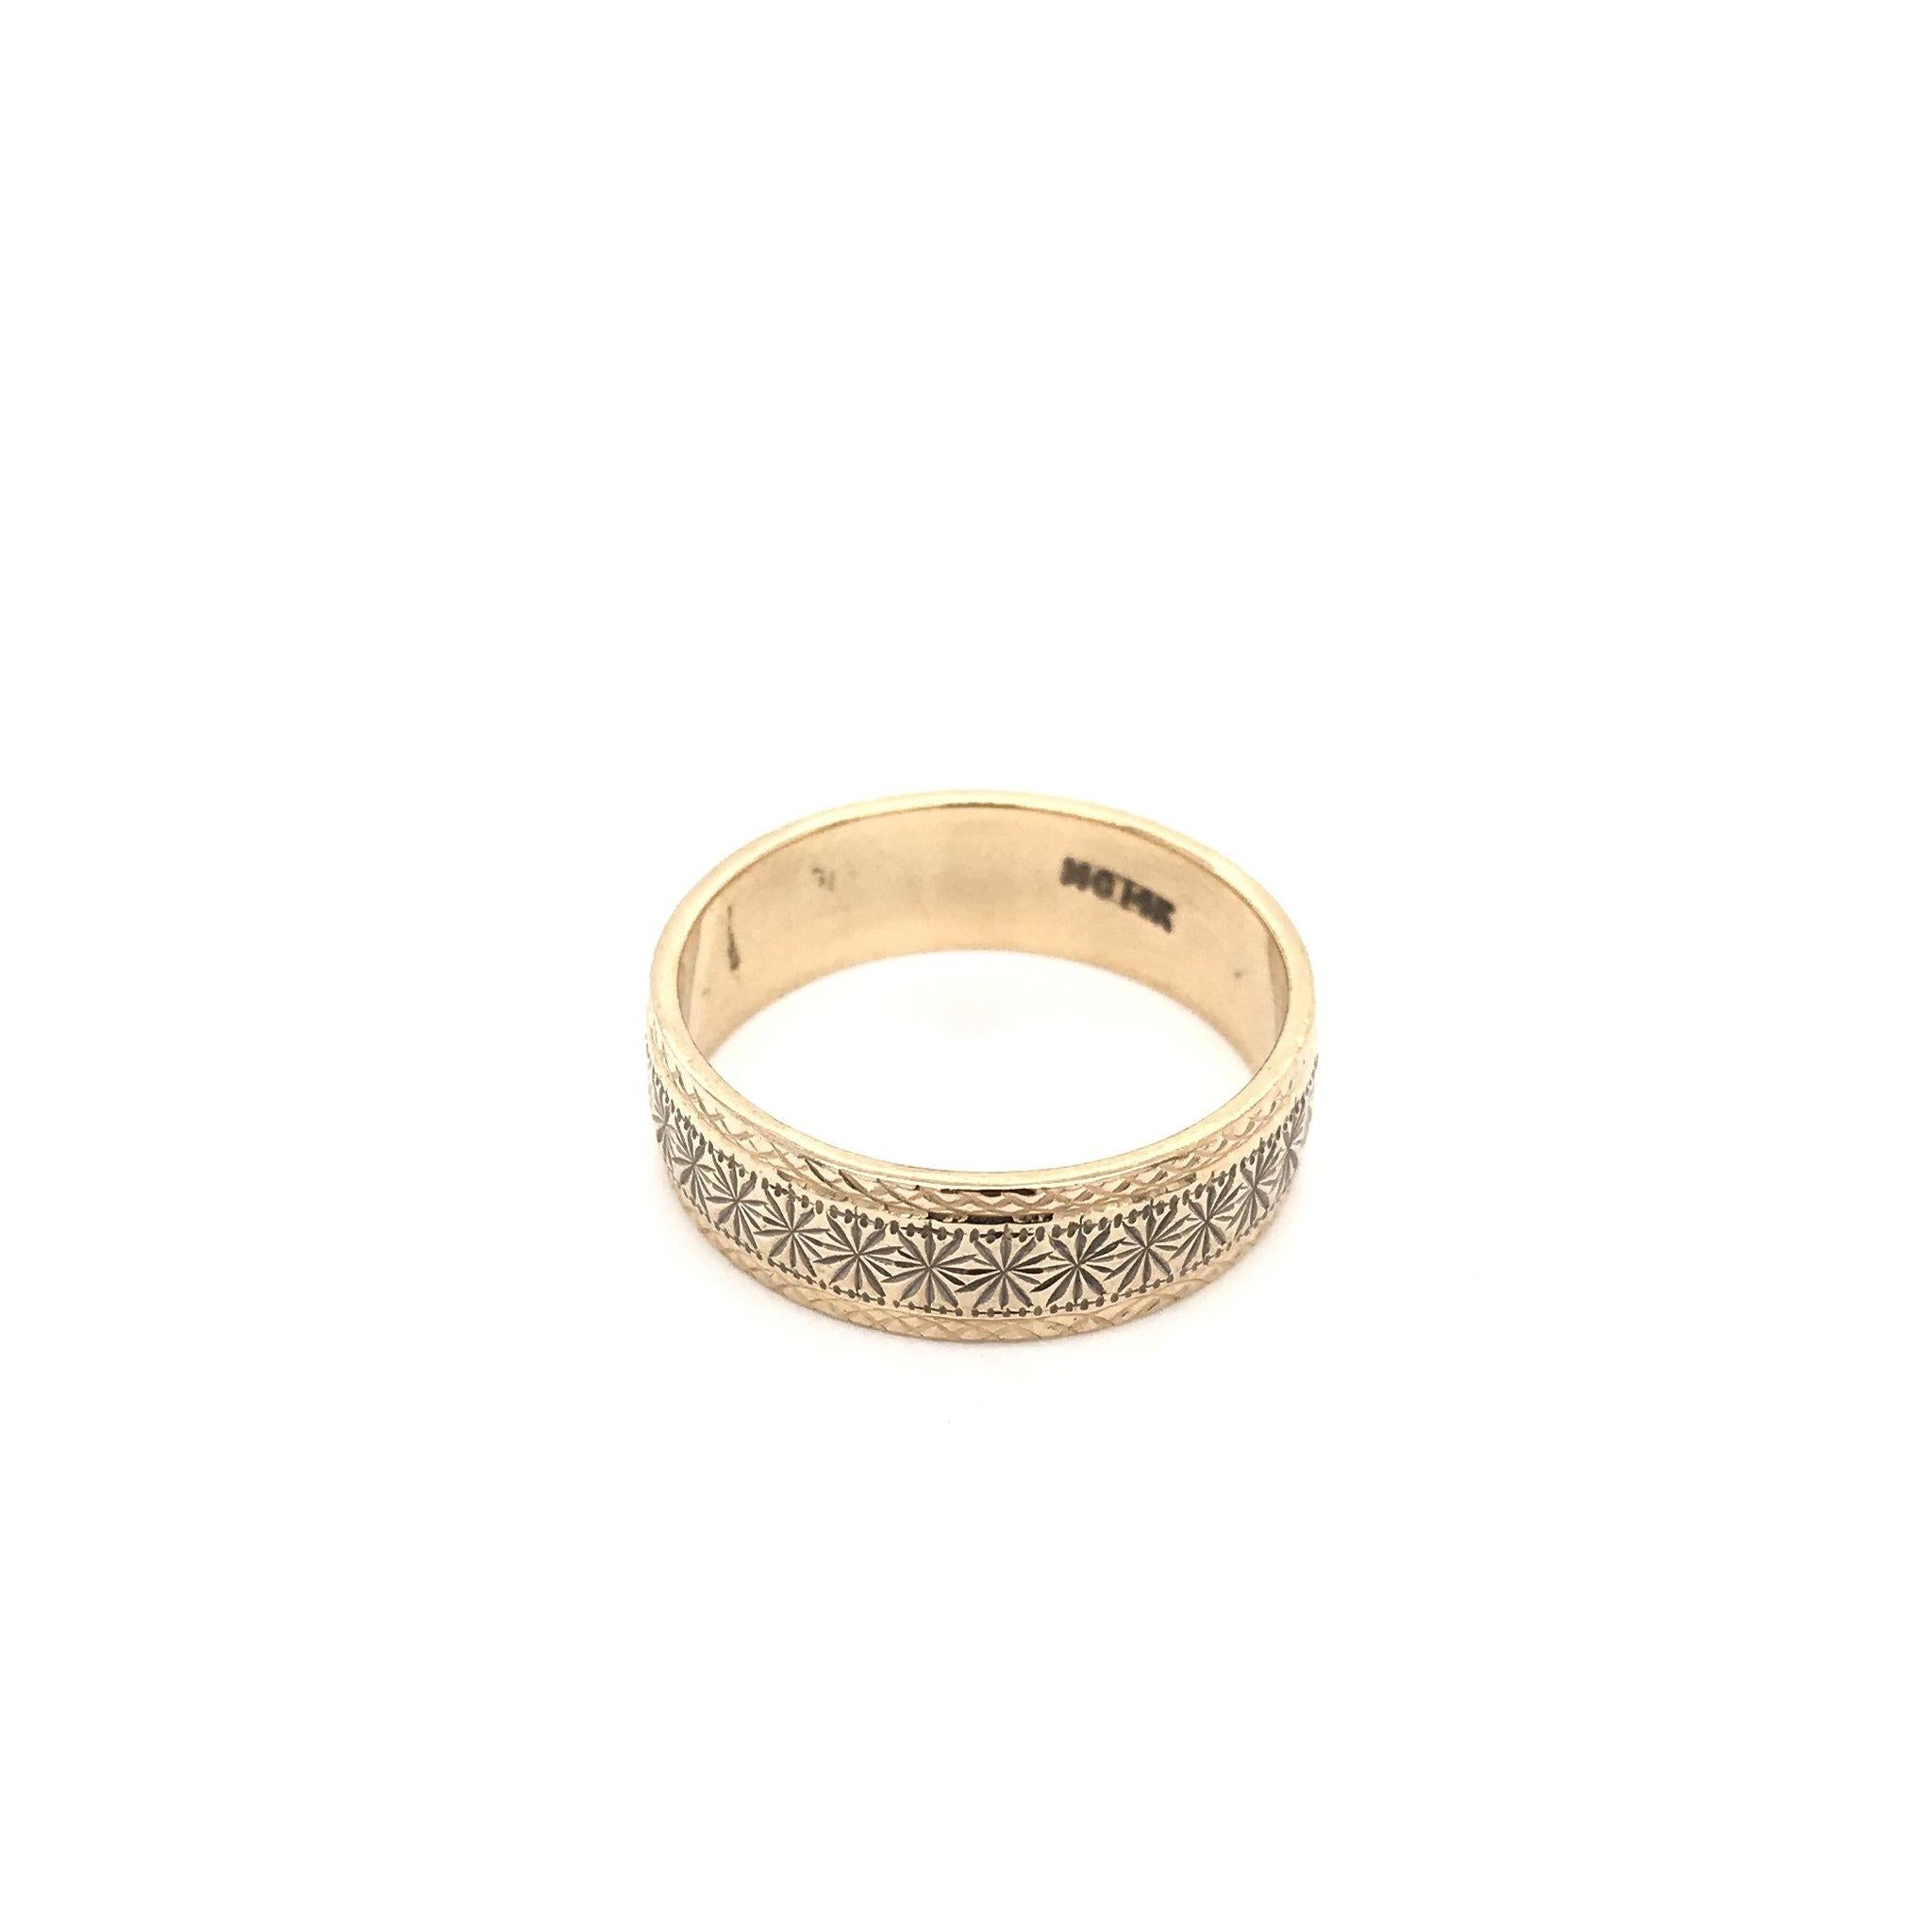 This decorative gold band is an estate piece. This ring is 14k gold and features intricate starburst engravings encompassing the entire length of the band. The band also features fine milgrain accents and textured borders as well. The attention to